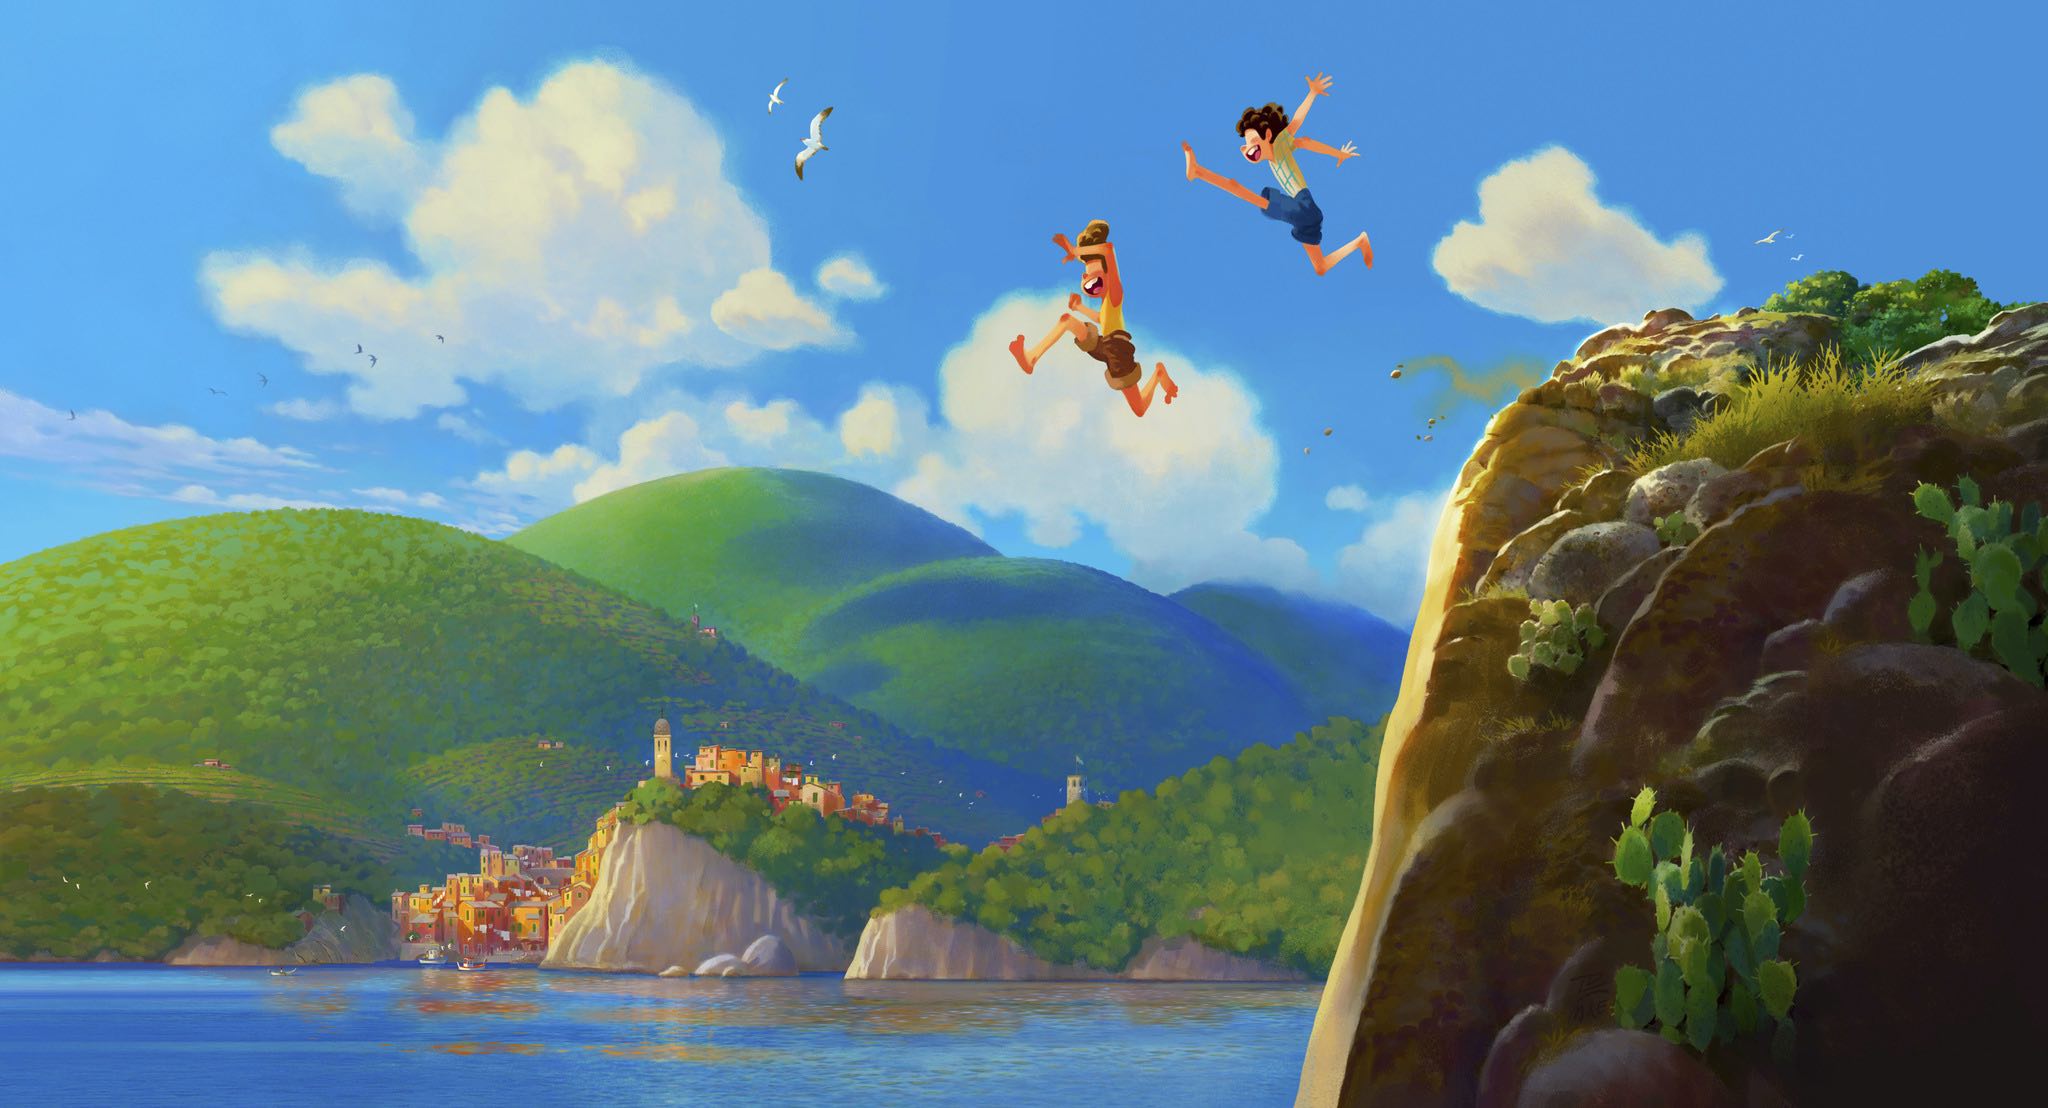 Pixar's Next Feature Film is 'Luca,' a Coming-of-Age Story Set on the Italian Riviera